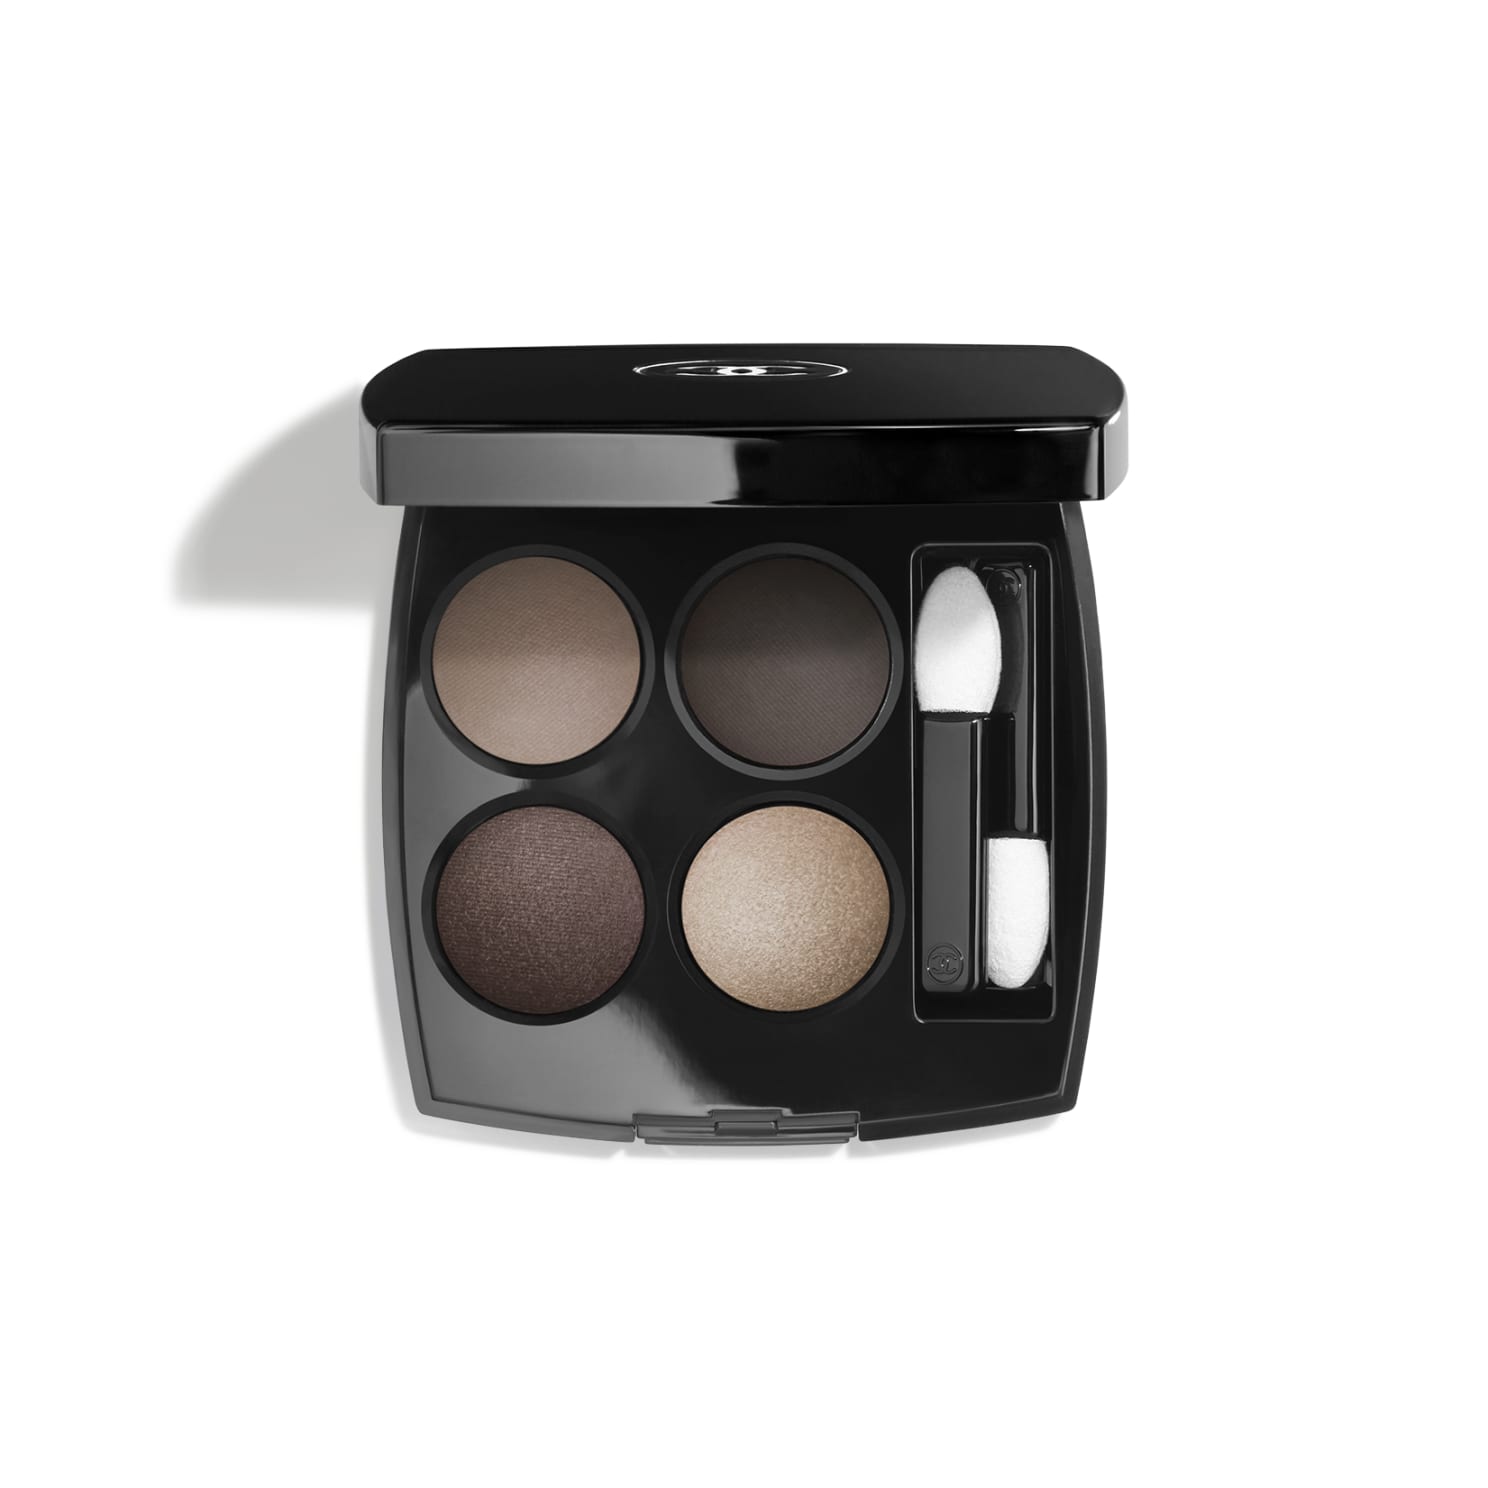 French Beauty Products Women Over 50: Chanel Les 4 Ombres Multi-Effect Quadra Eyeshadow